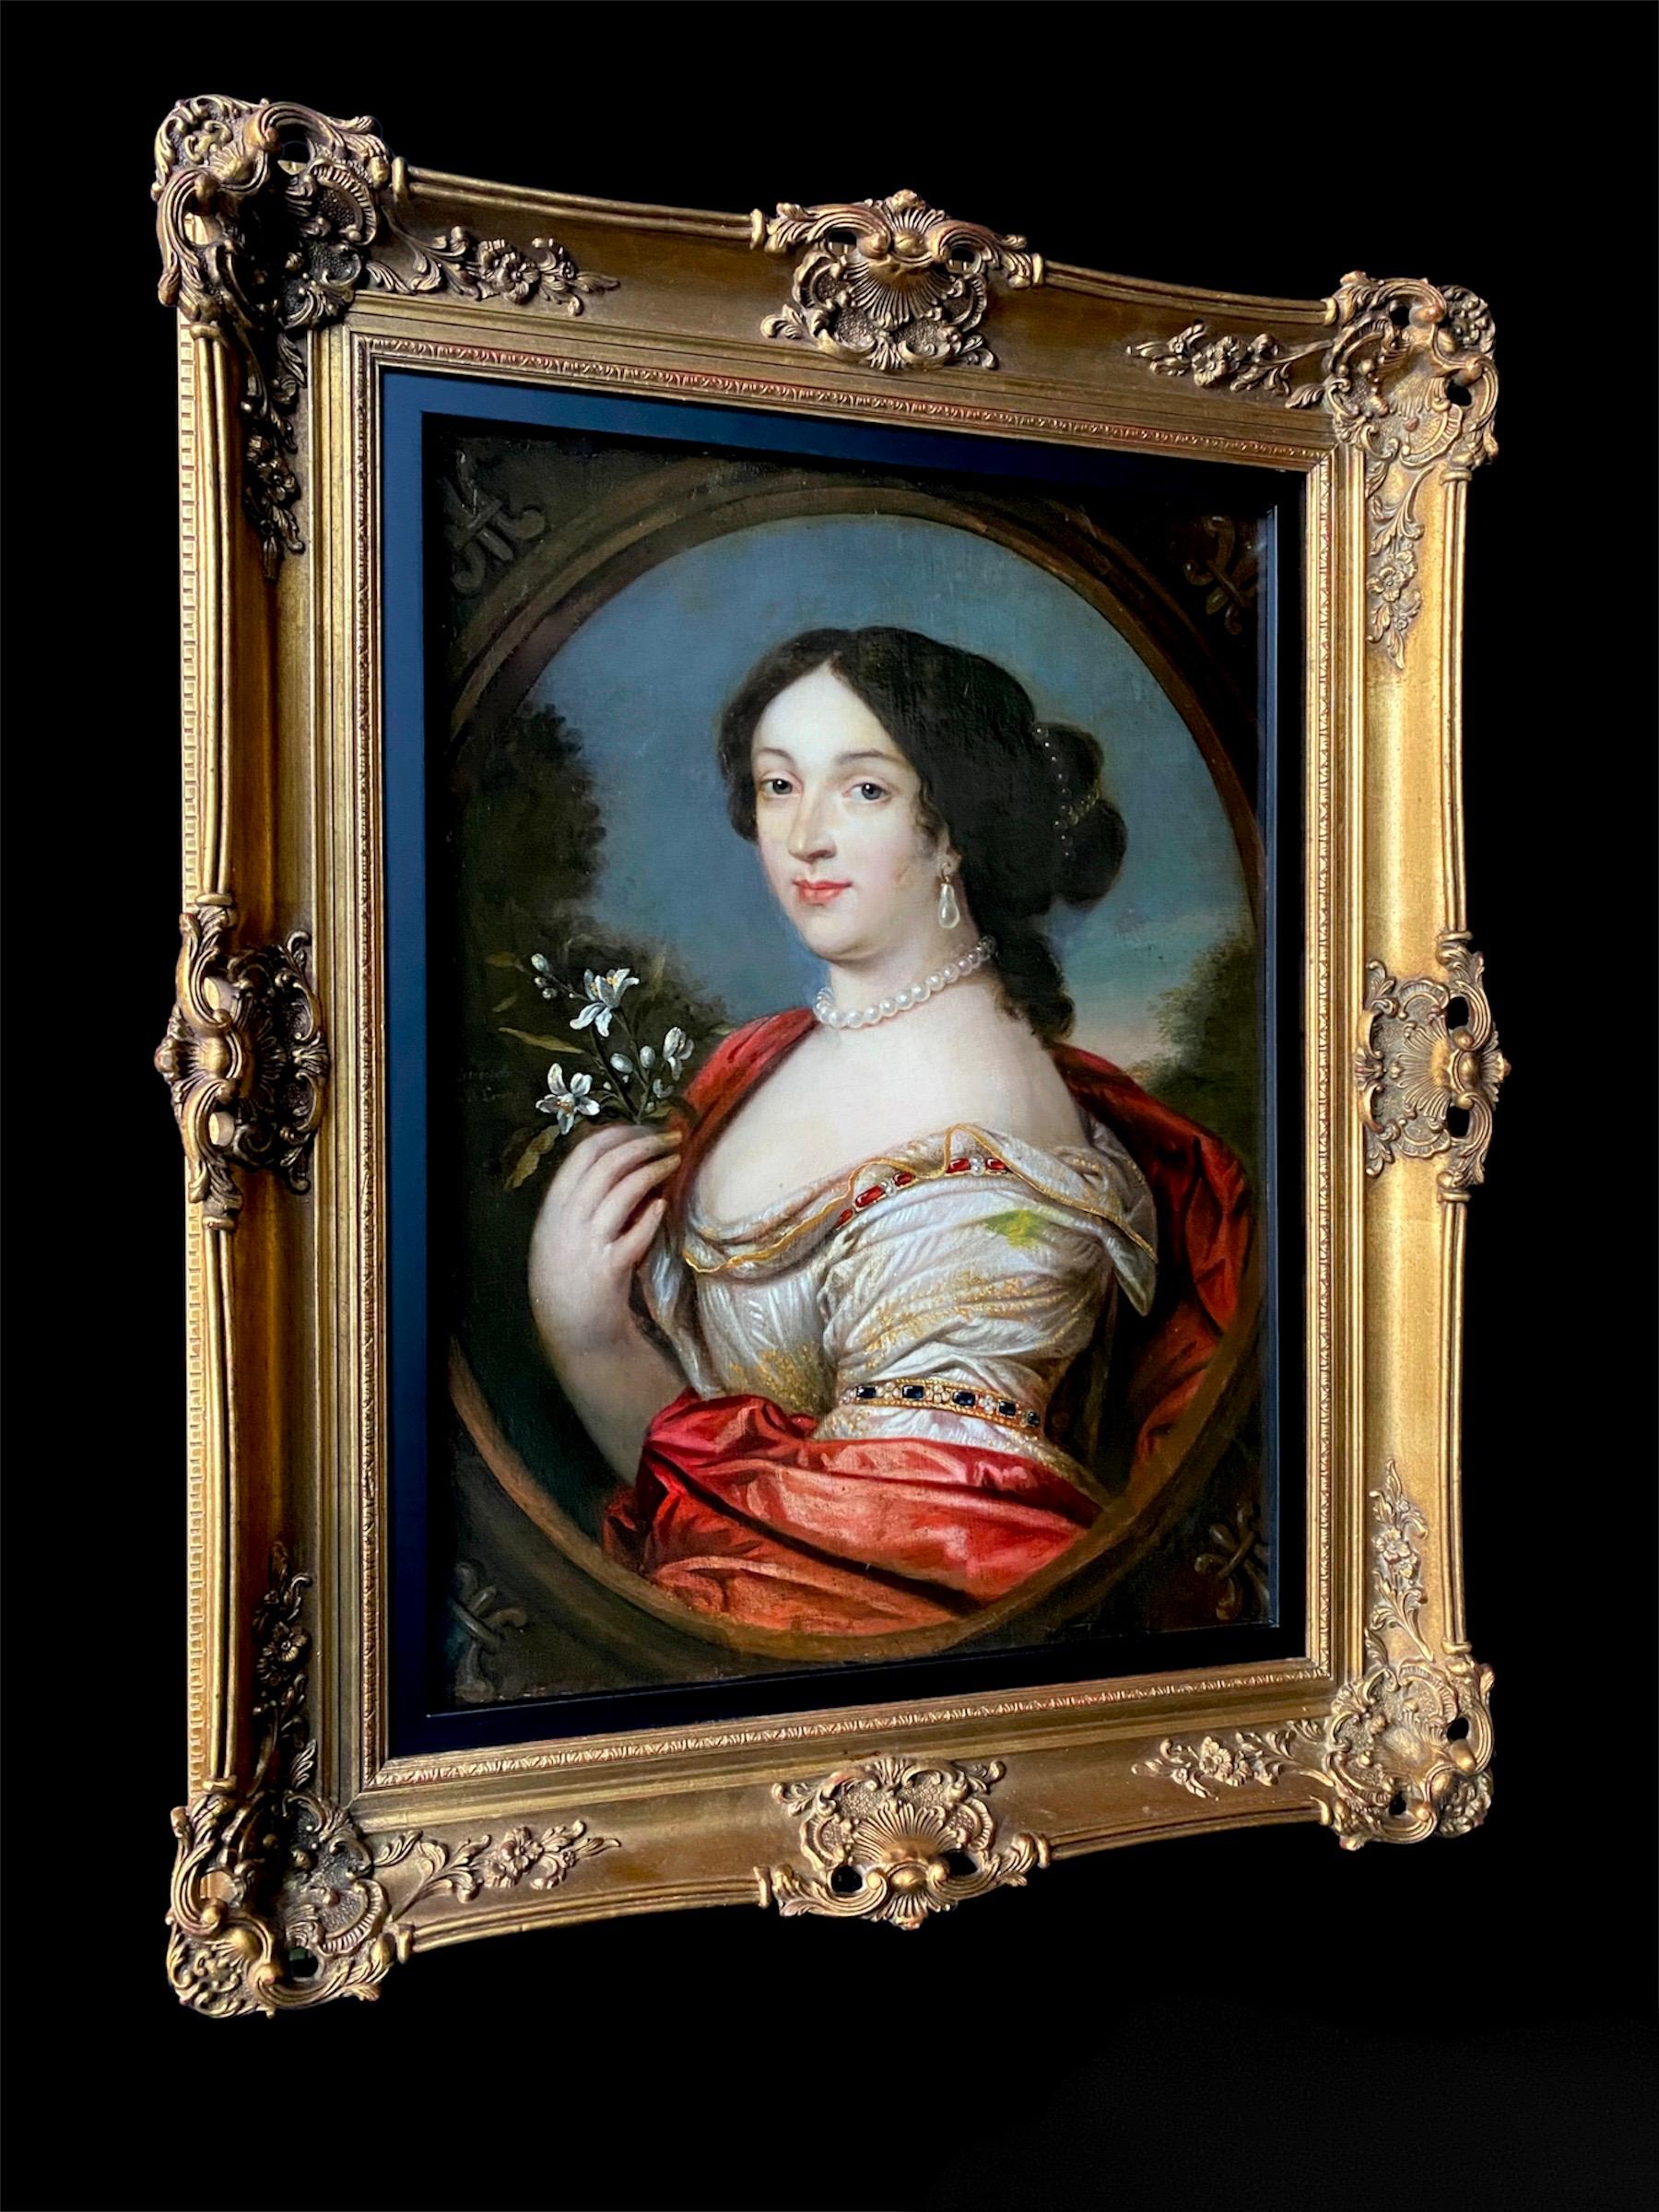 french author and courtesan of the late 17th century